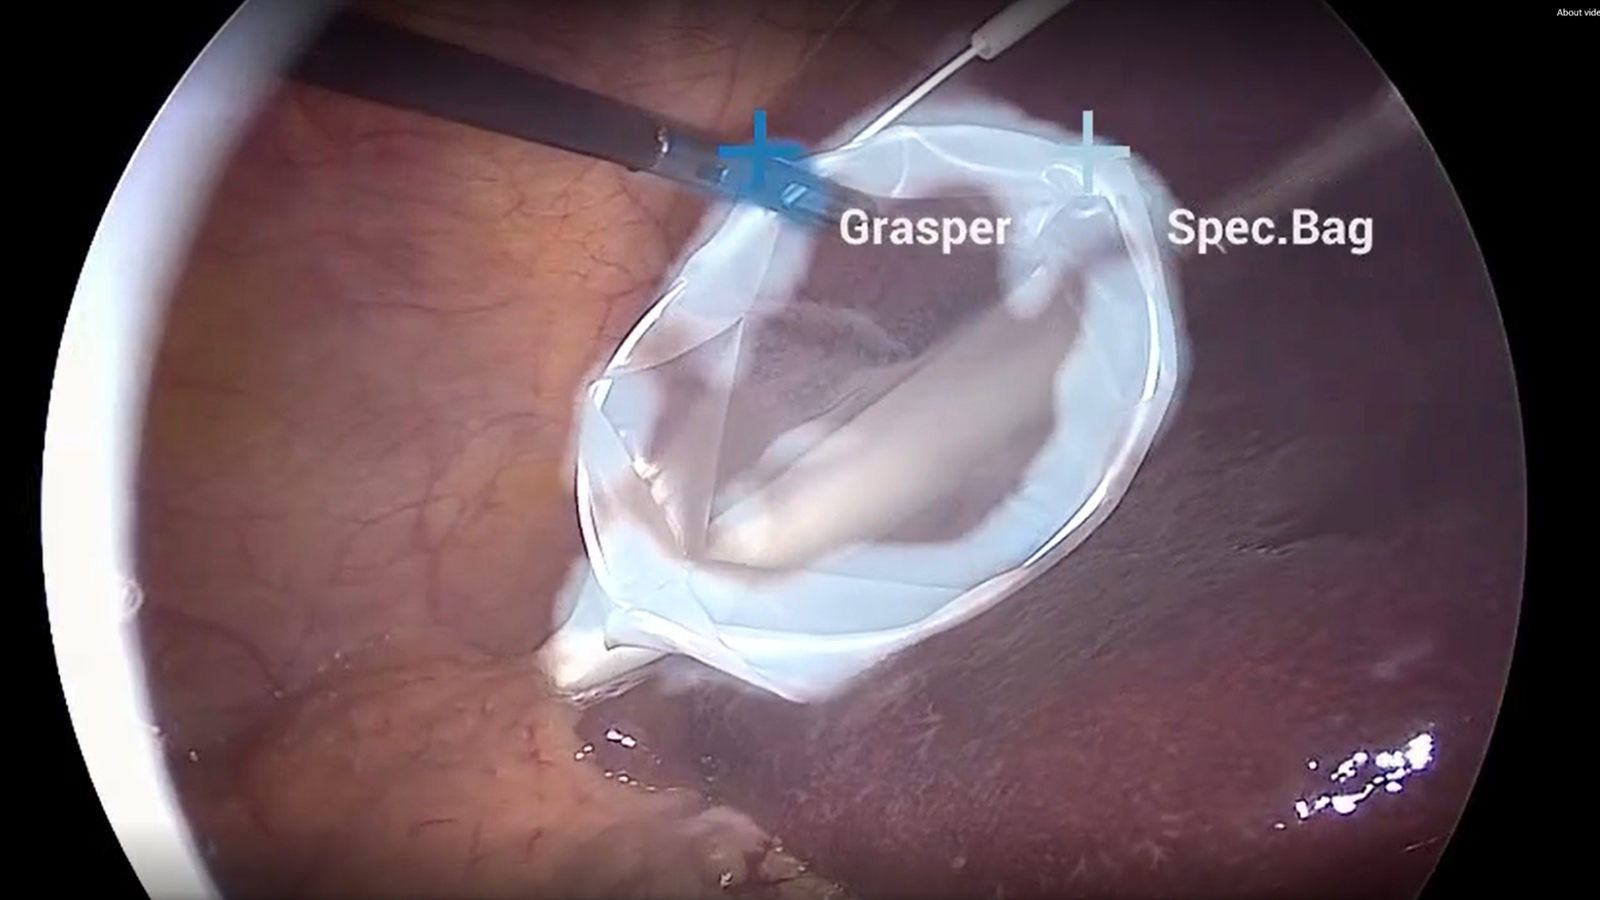 Frame by frame identification and tracking in endoscopy